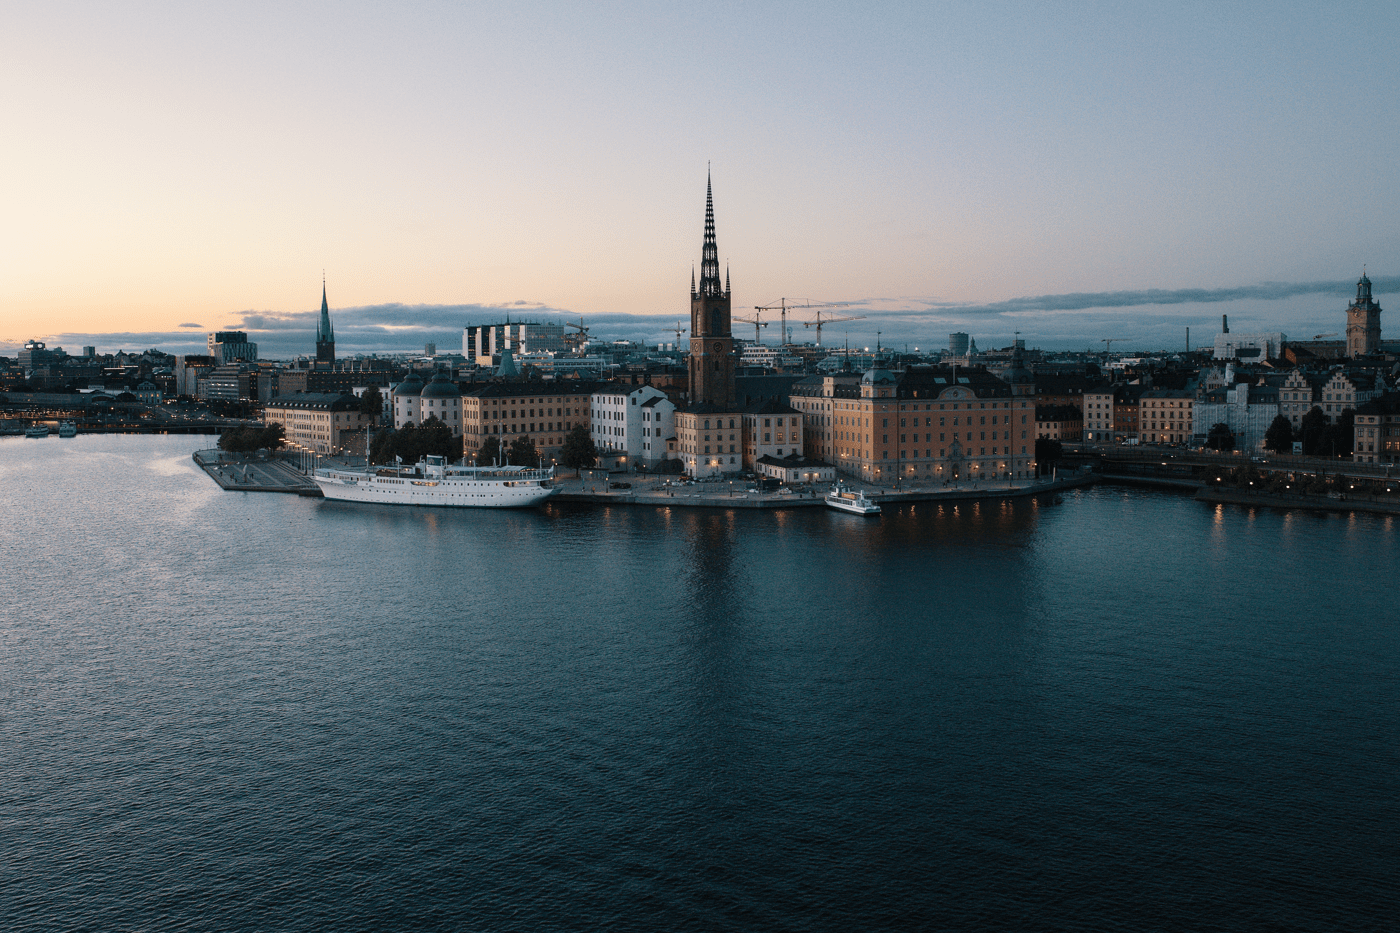 Stockholm skyline in an evening setting of the main island and its surrounding waters